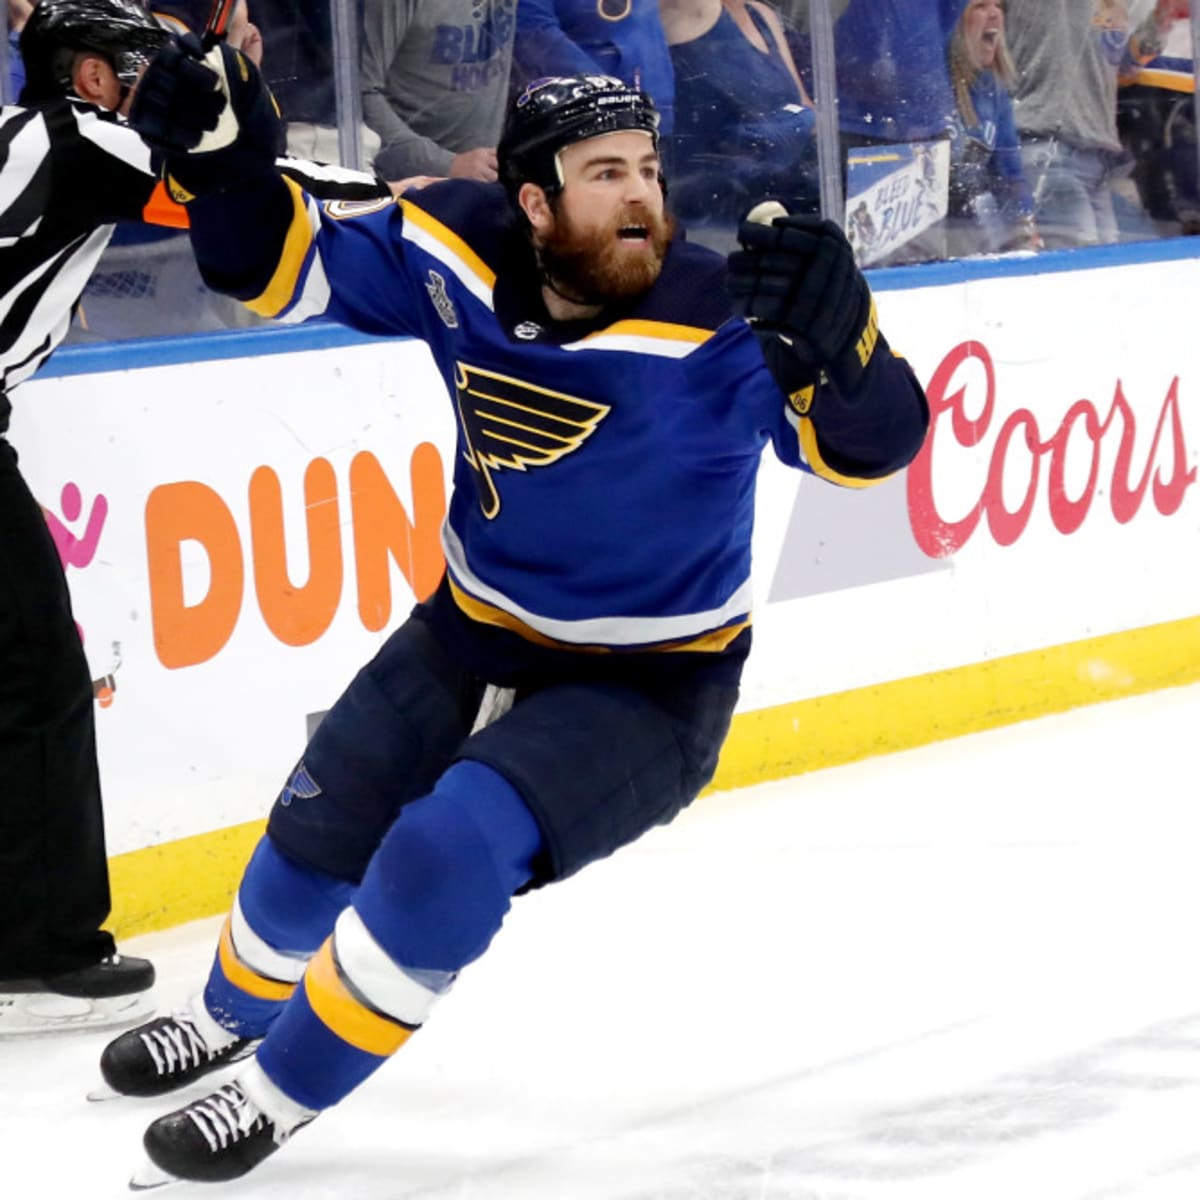 Blues, Ryan O'Reilly would be perfect fit as captain